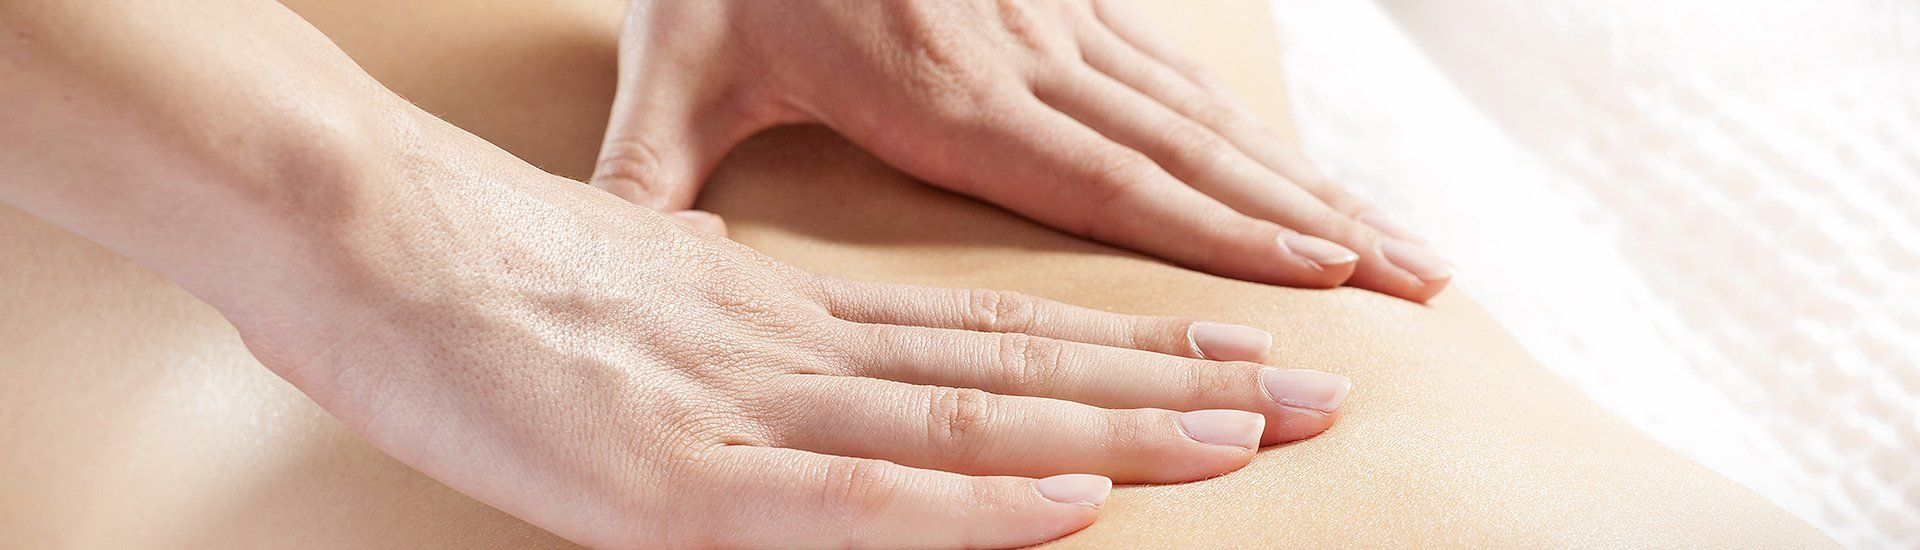 massages to help relieve stress from your back